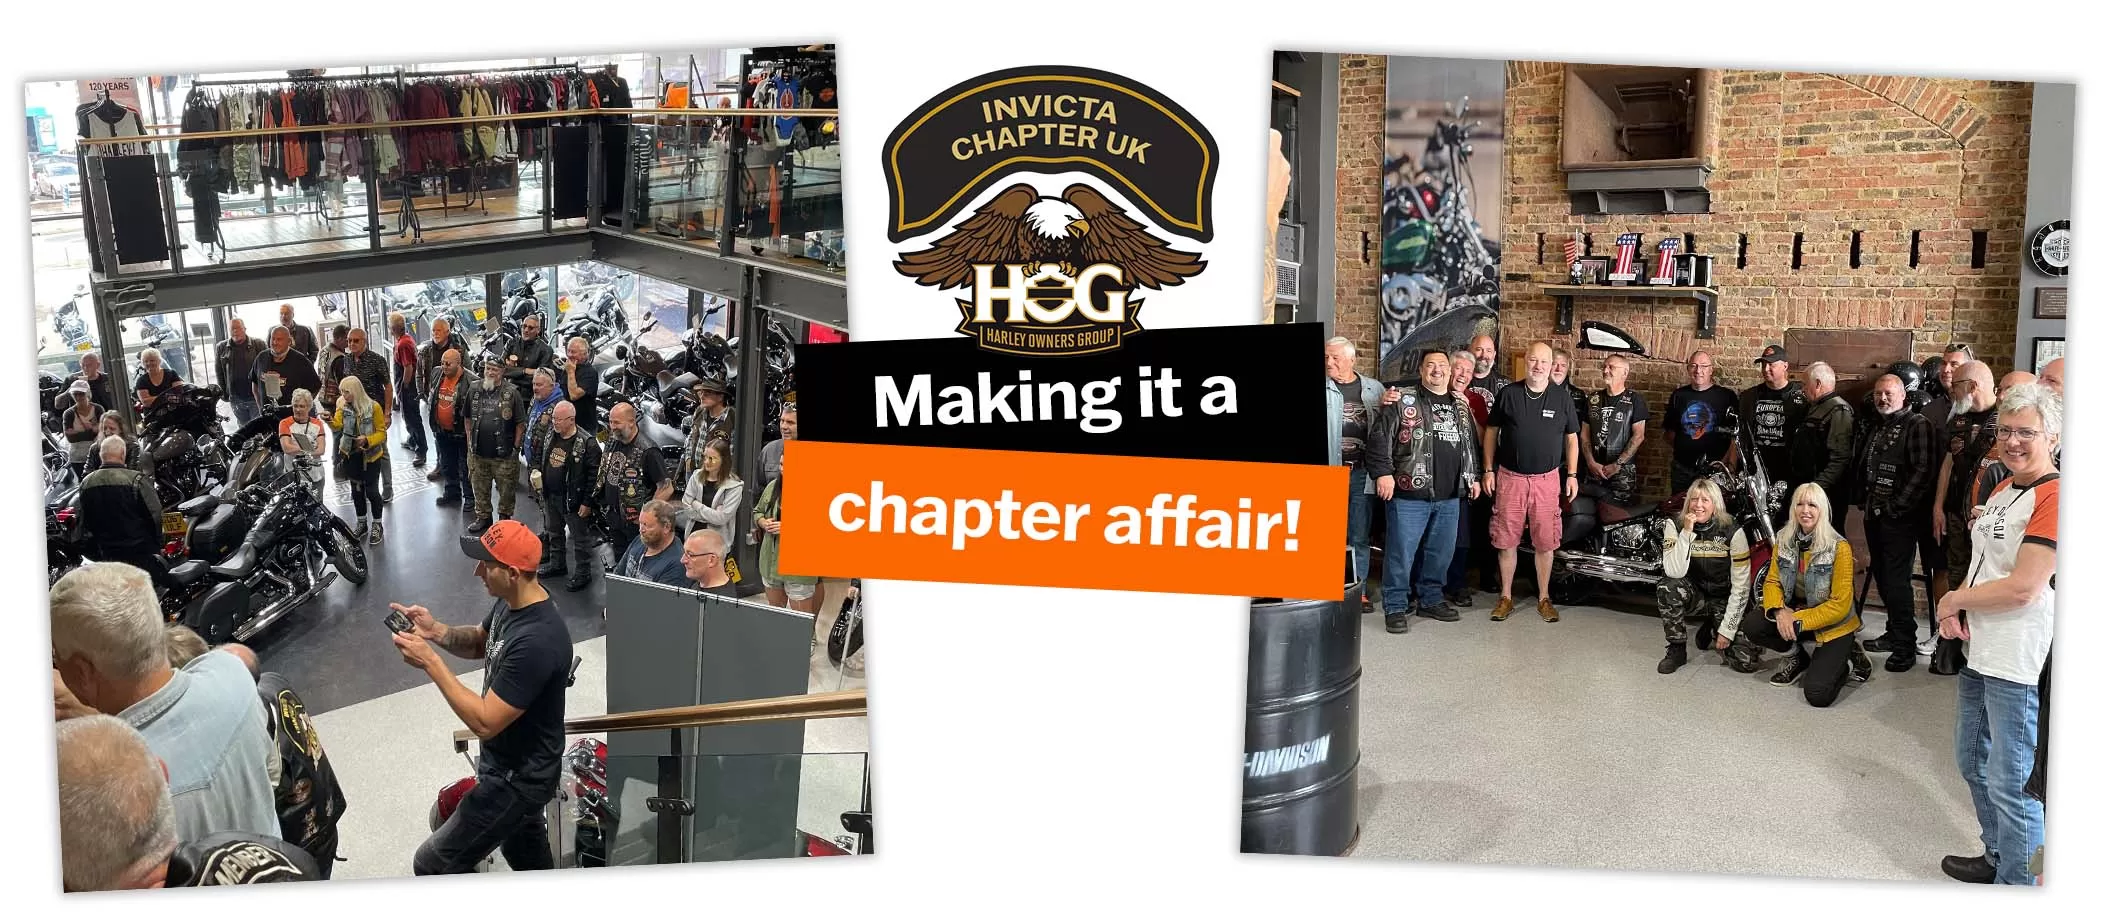 Maidstone Harley-Davidson's Invicta HOG Chapter member, Ged, won a brand new 120th Anniversary Edition Heritage at the 120 Year Celebrations in Budapest!